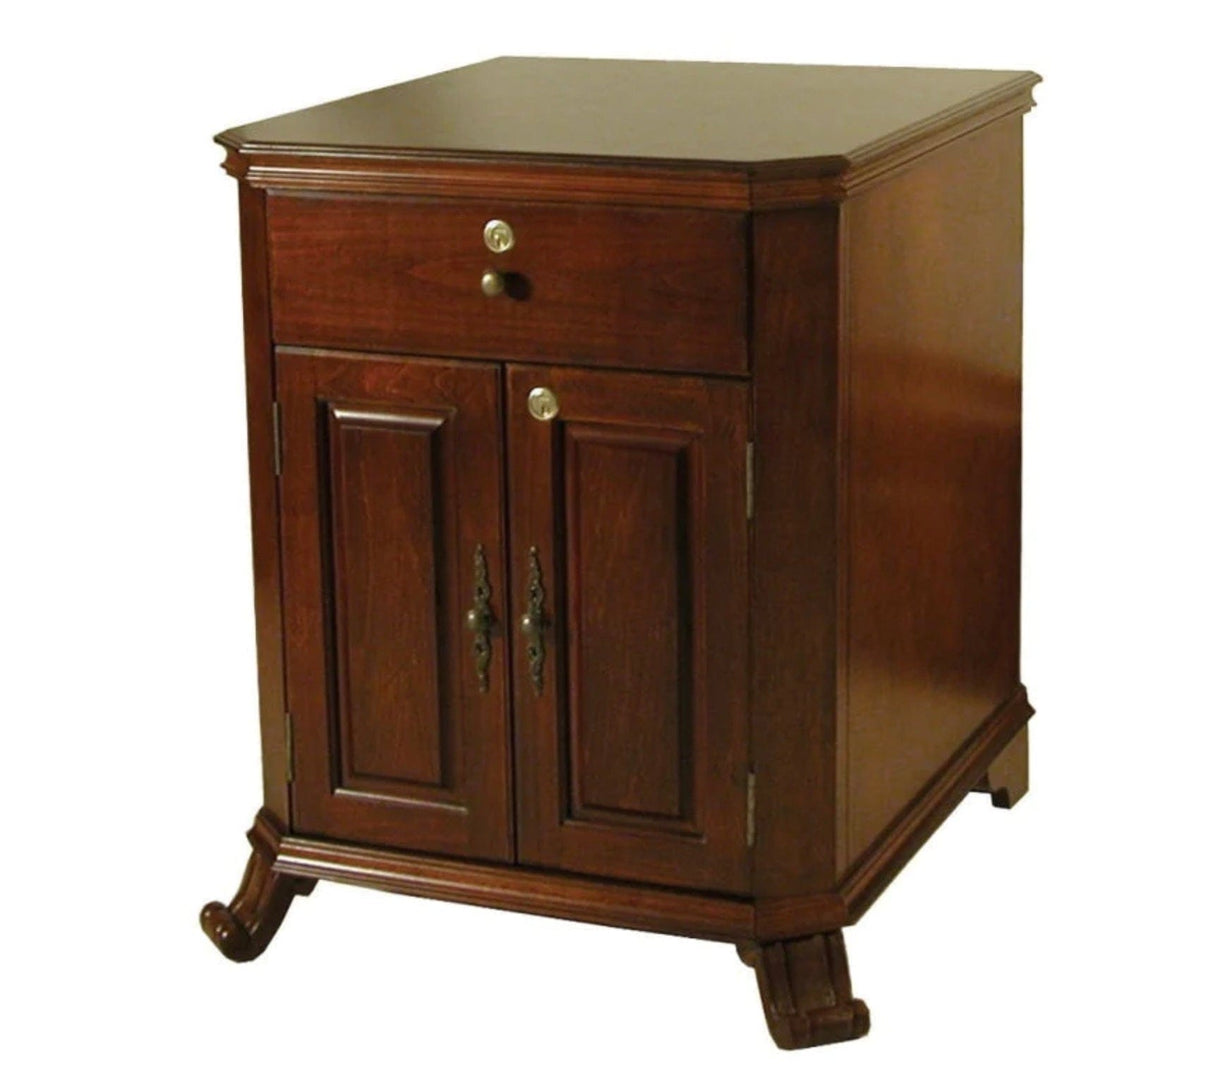 Humidor Supreme Montegue 1500 Count Cigar End Table Humidor in French Walnut Finish HUM-MONT CAB